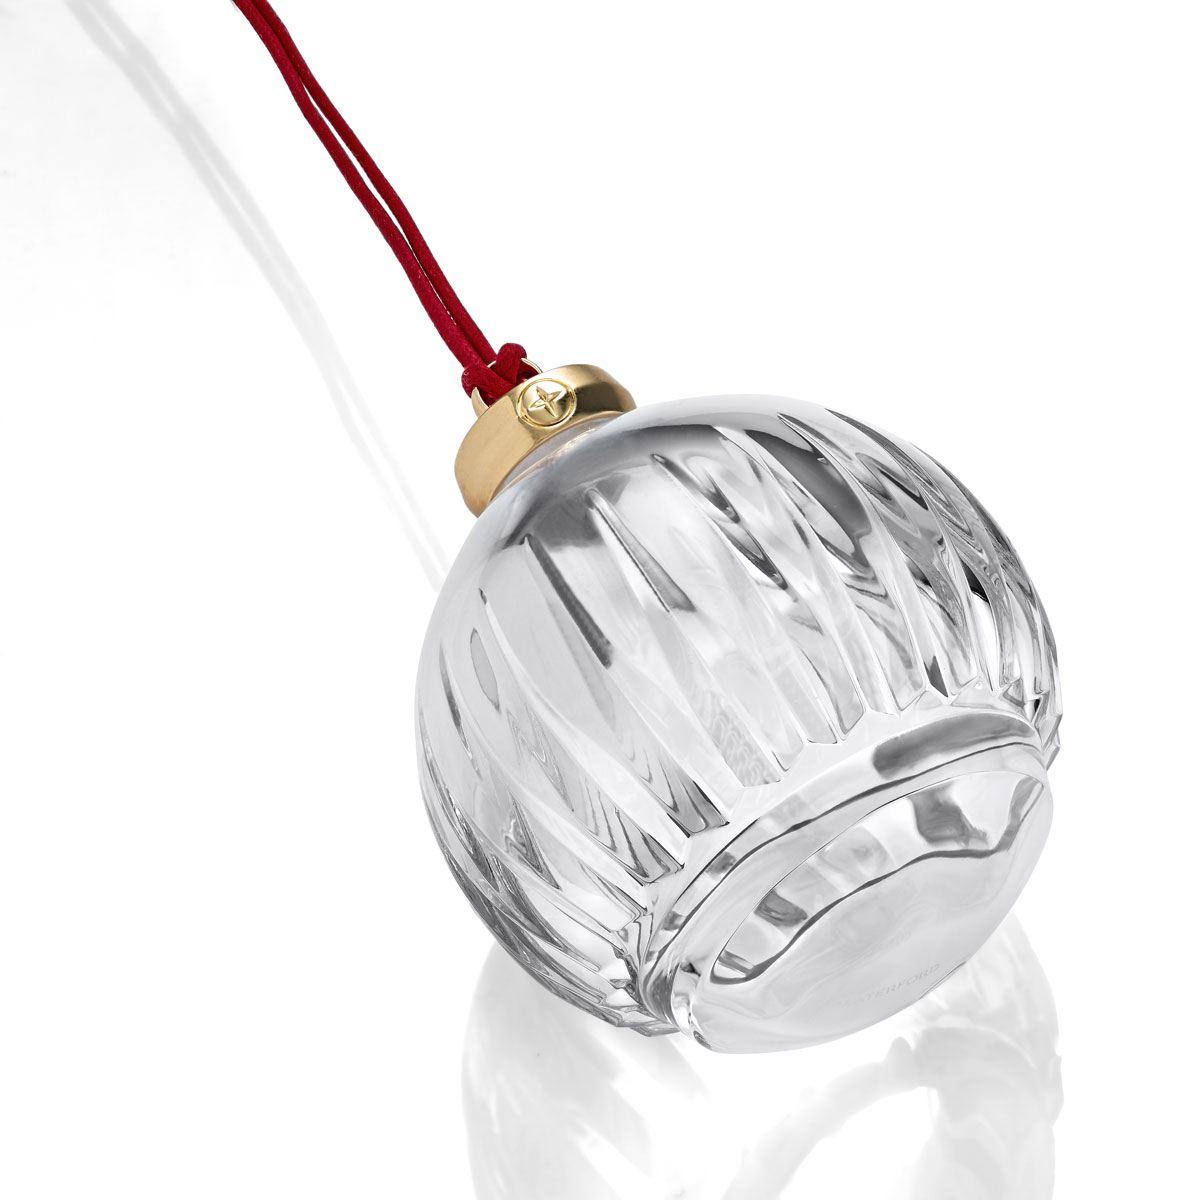 Waterford New Year 2025 Firework Bauble Dated Ornament, Clear